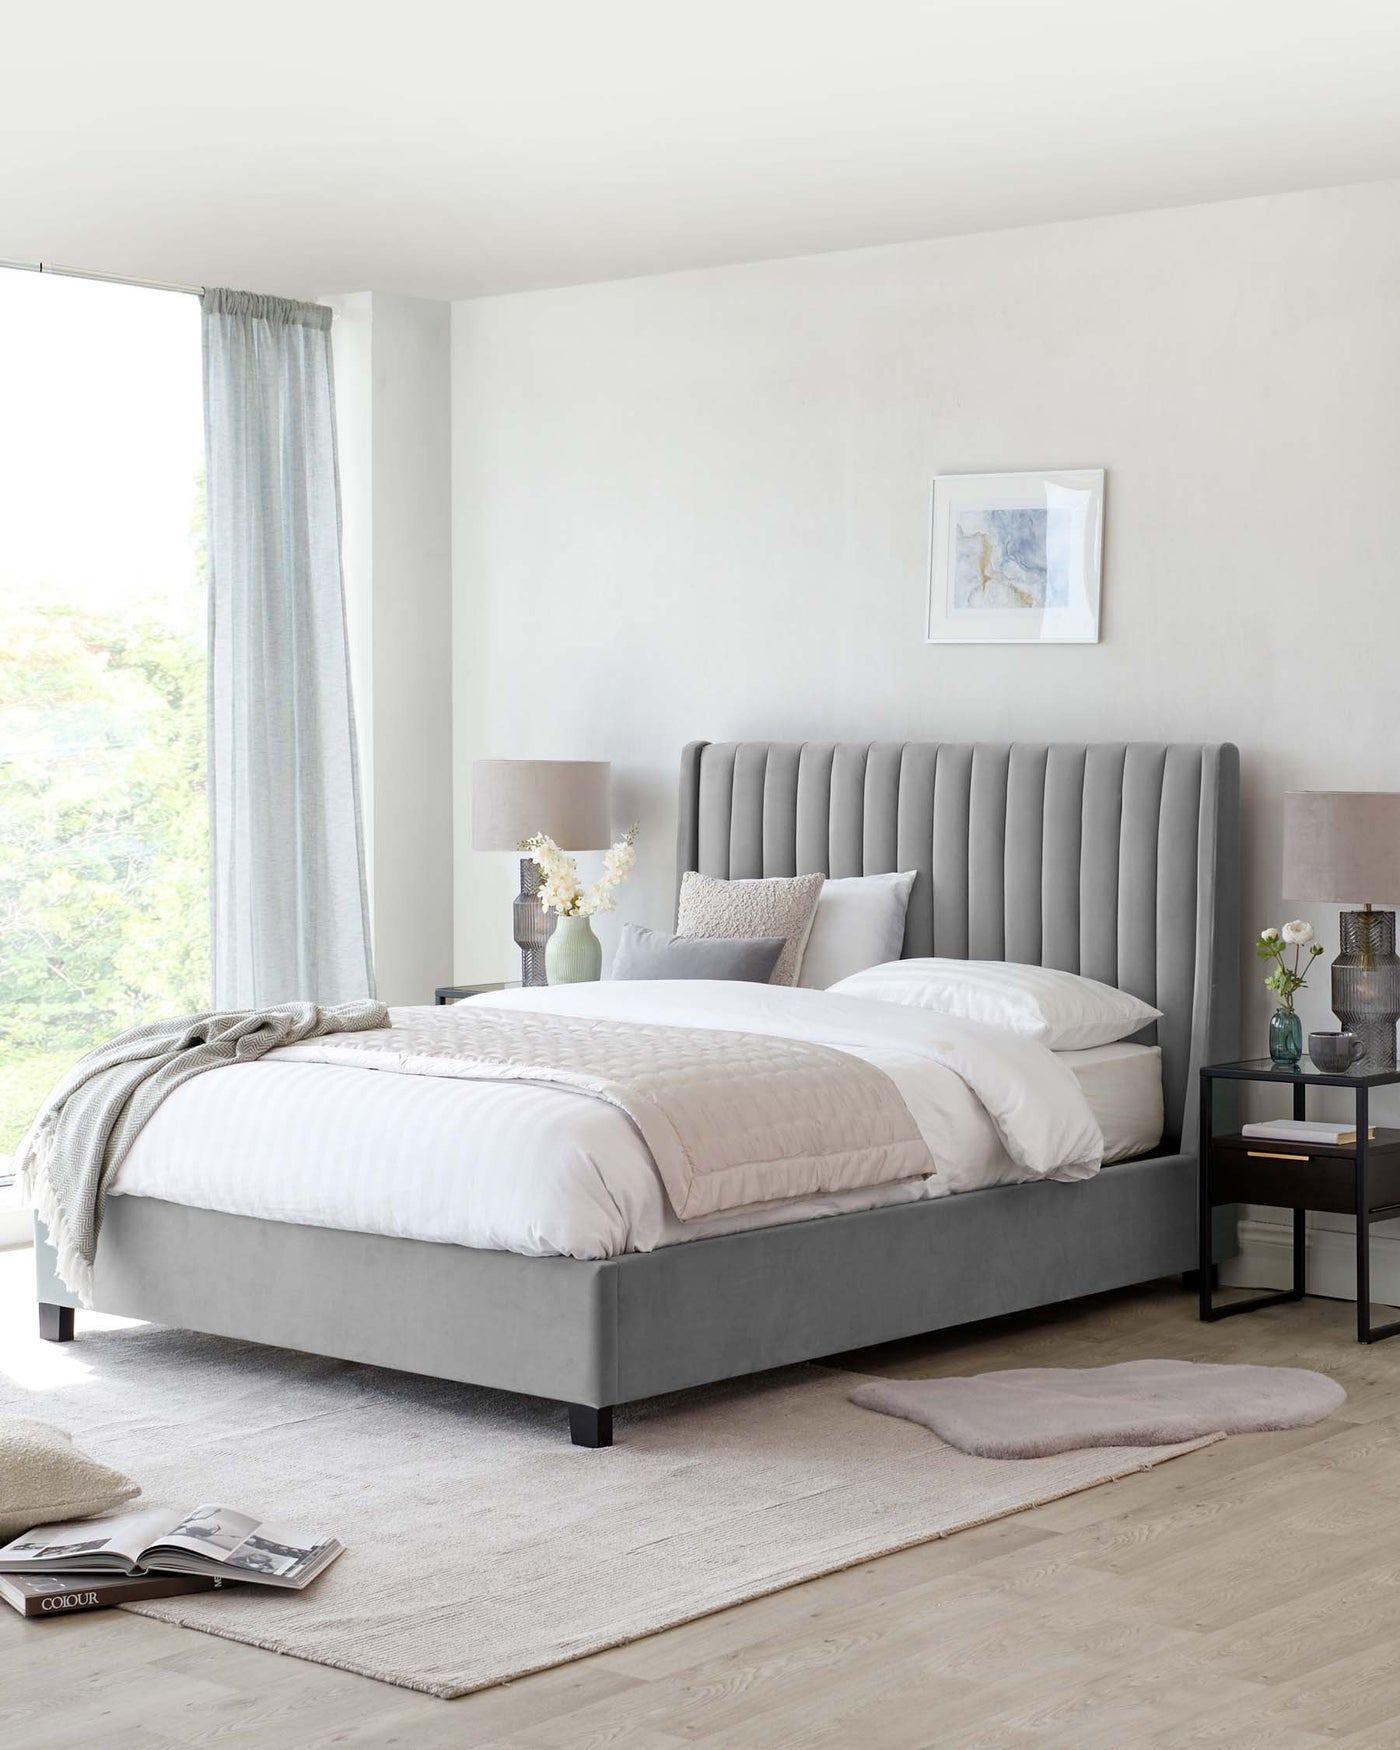 A contemporary-styled bedroom featuring a large upholstered bed with a tall, vertical channel-tufted headboard in a soft grey fabric. The bed is dressed in white linens with a textured comforter and multiple pillows varying in size and shades of grey and white. Beside the bed, there's a small dark wood nightstand with a drawer, accompanied by a simple modern table lamp with a grey shade. The room is carpeted with a large, light beige area rug, complementing the neutral, serene colour palette of the space.